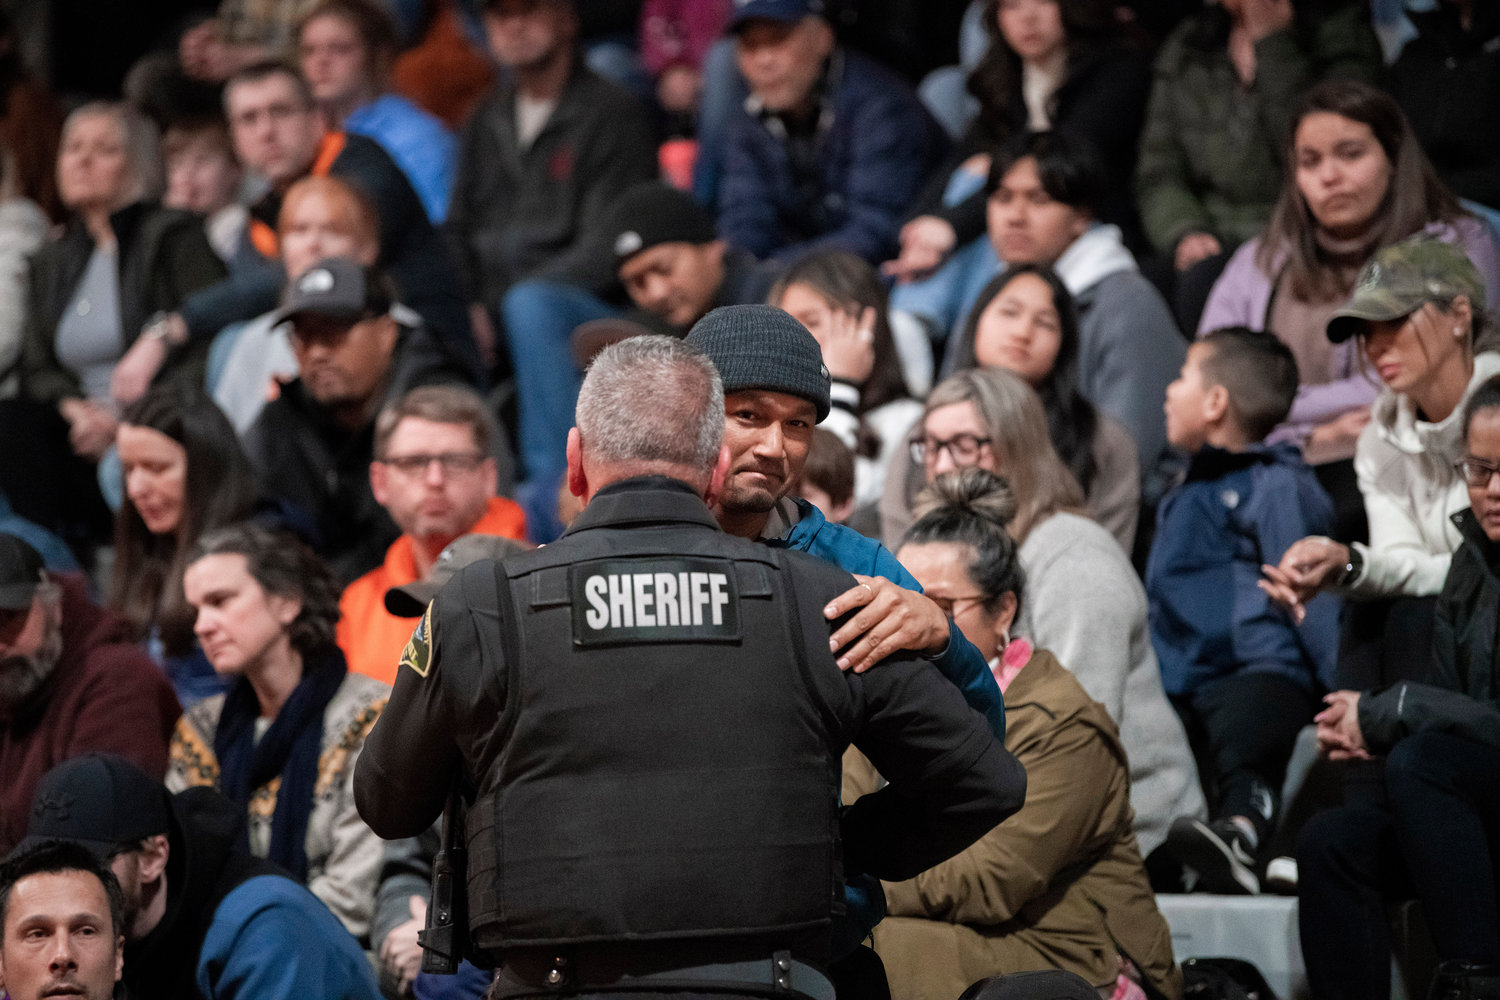 Sopheak Uch, the father of Jessie Uch, receives an embrace from a member of the Thurston County Sheriff’s Office, which is leading the investigation, during a vigil at Rainier High School on Tuesday.